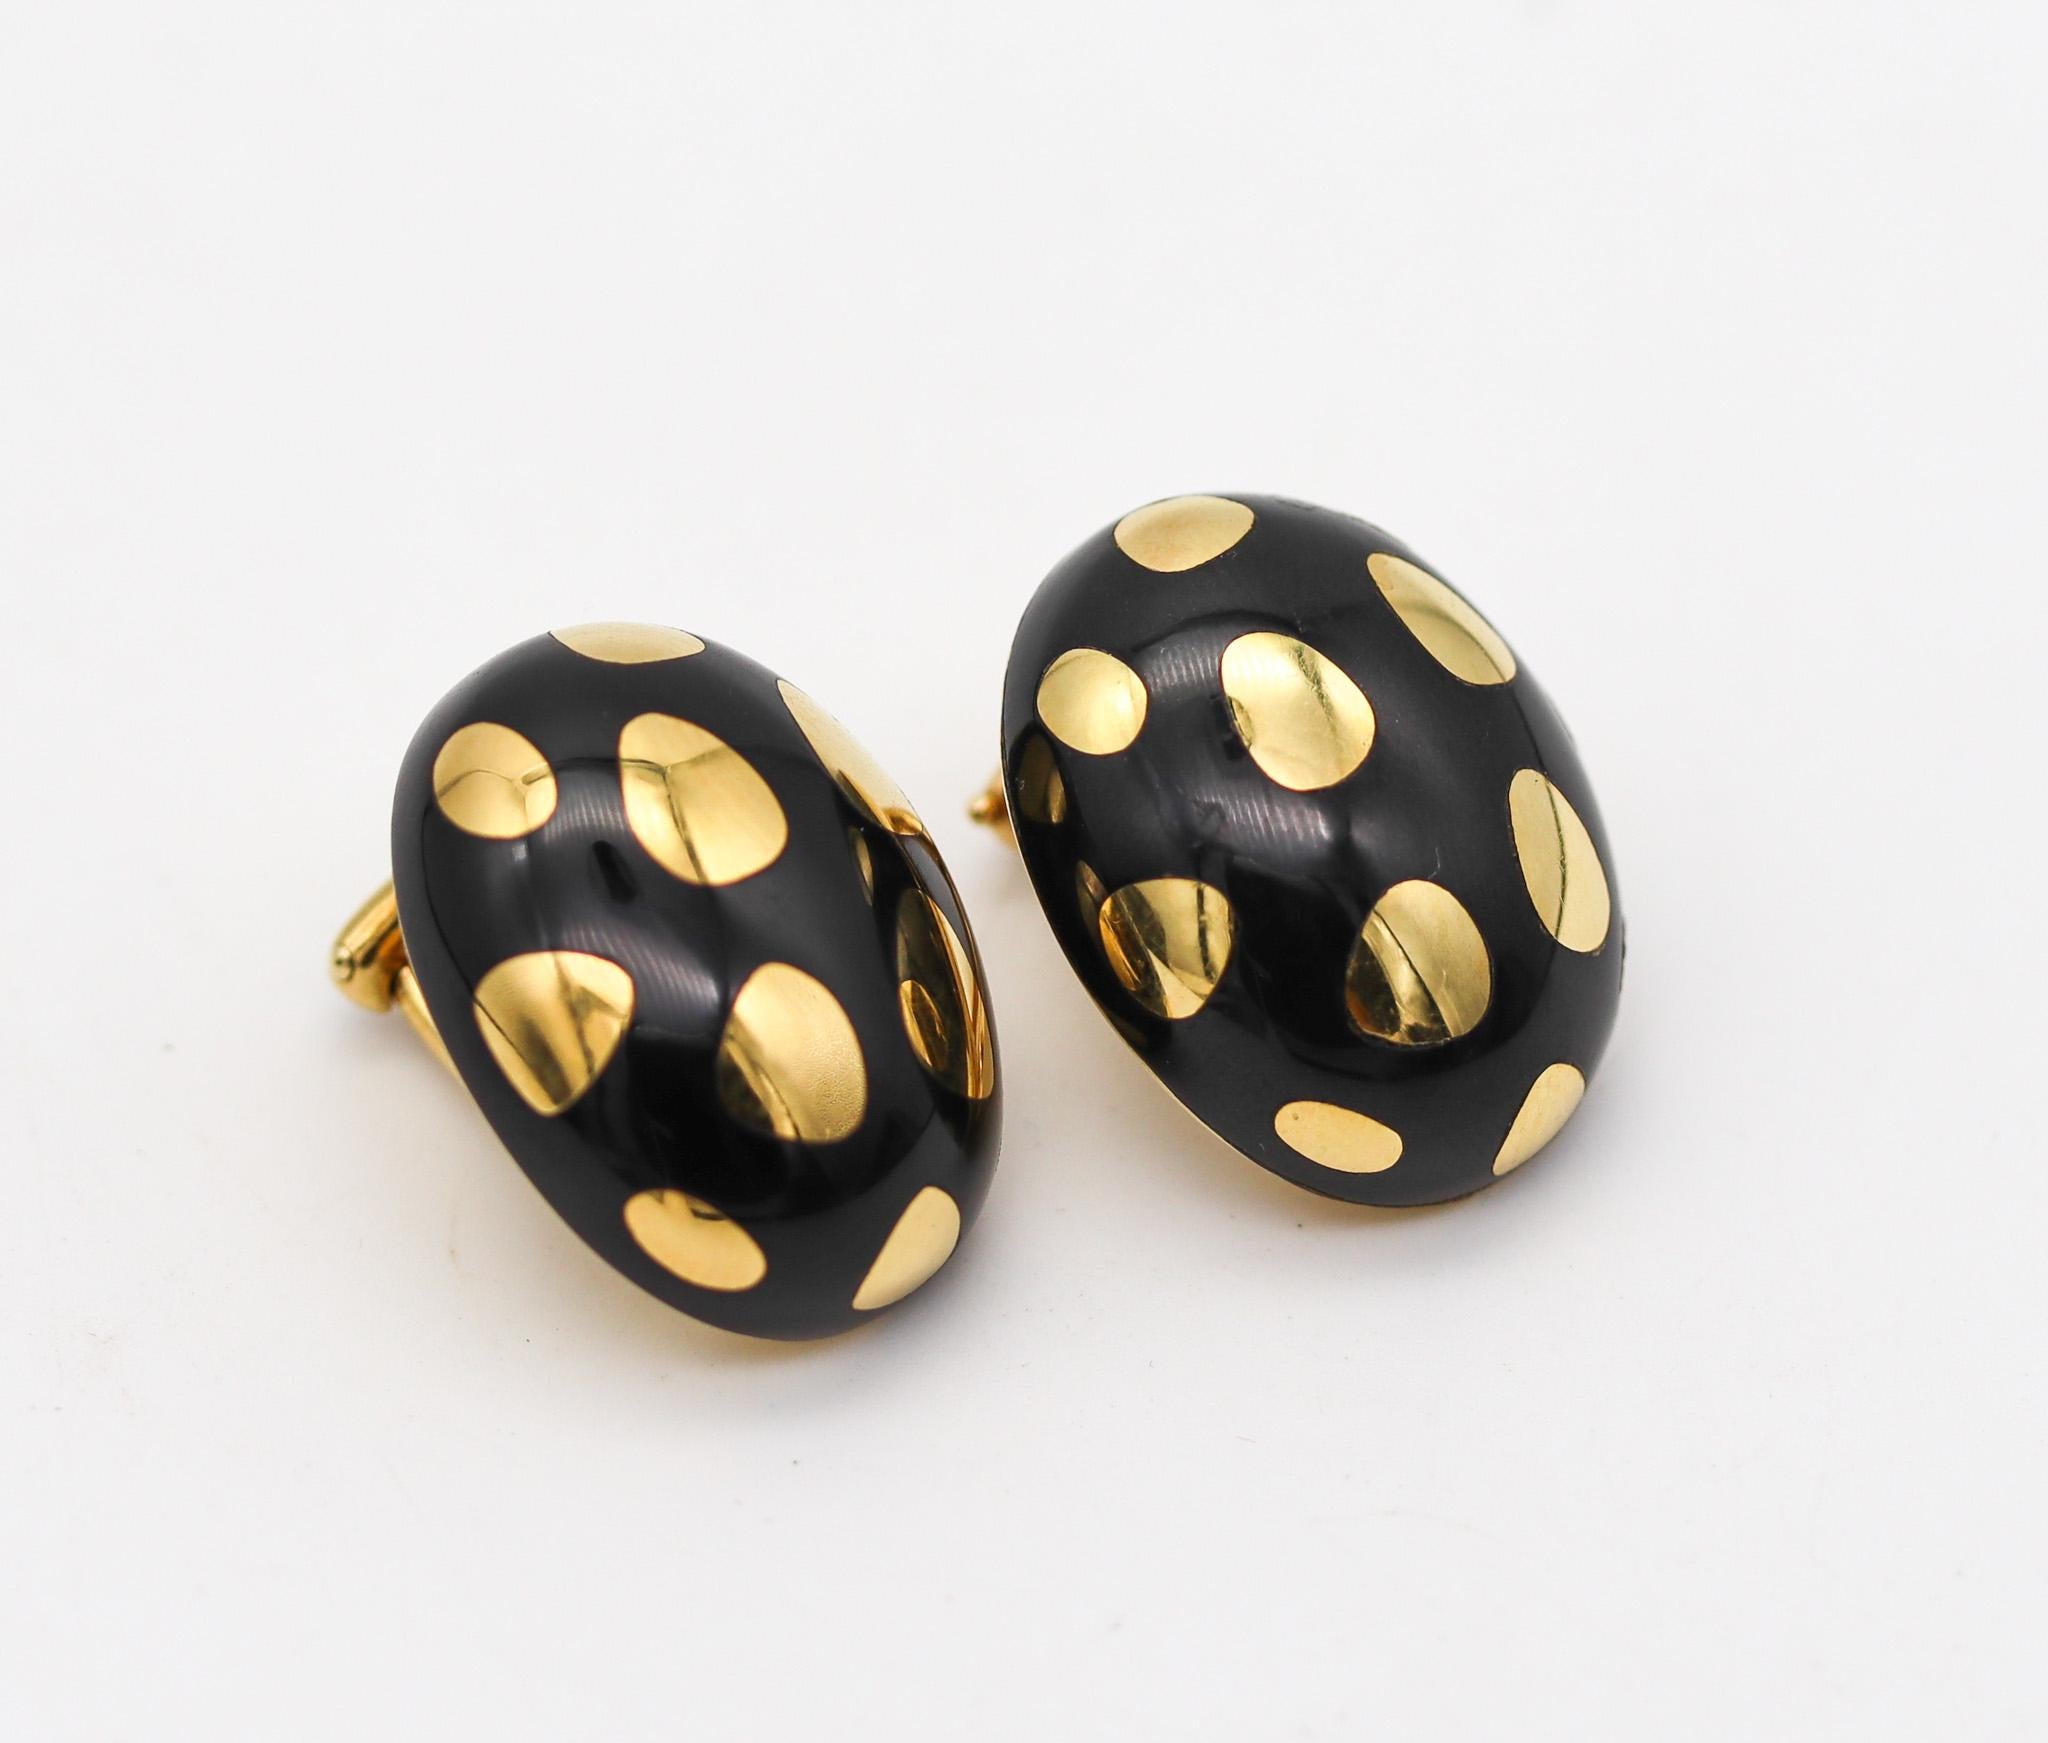 Cabochon Tiffany & Co 1979 Angela Cummings Black Jade Earrings With 18Kt Gold Polka Dots For Sale